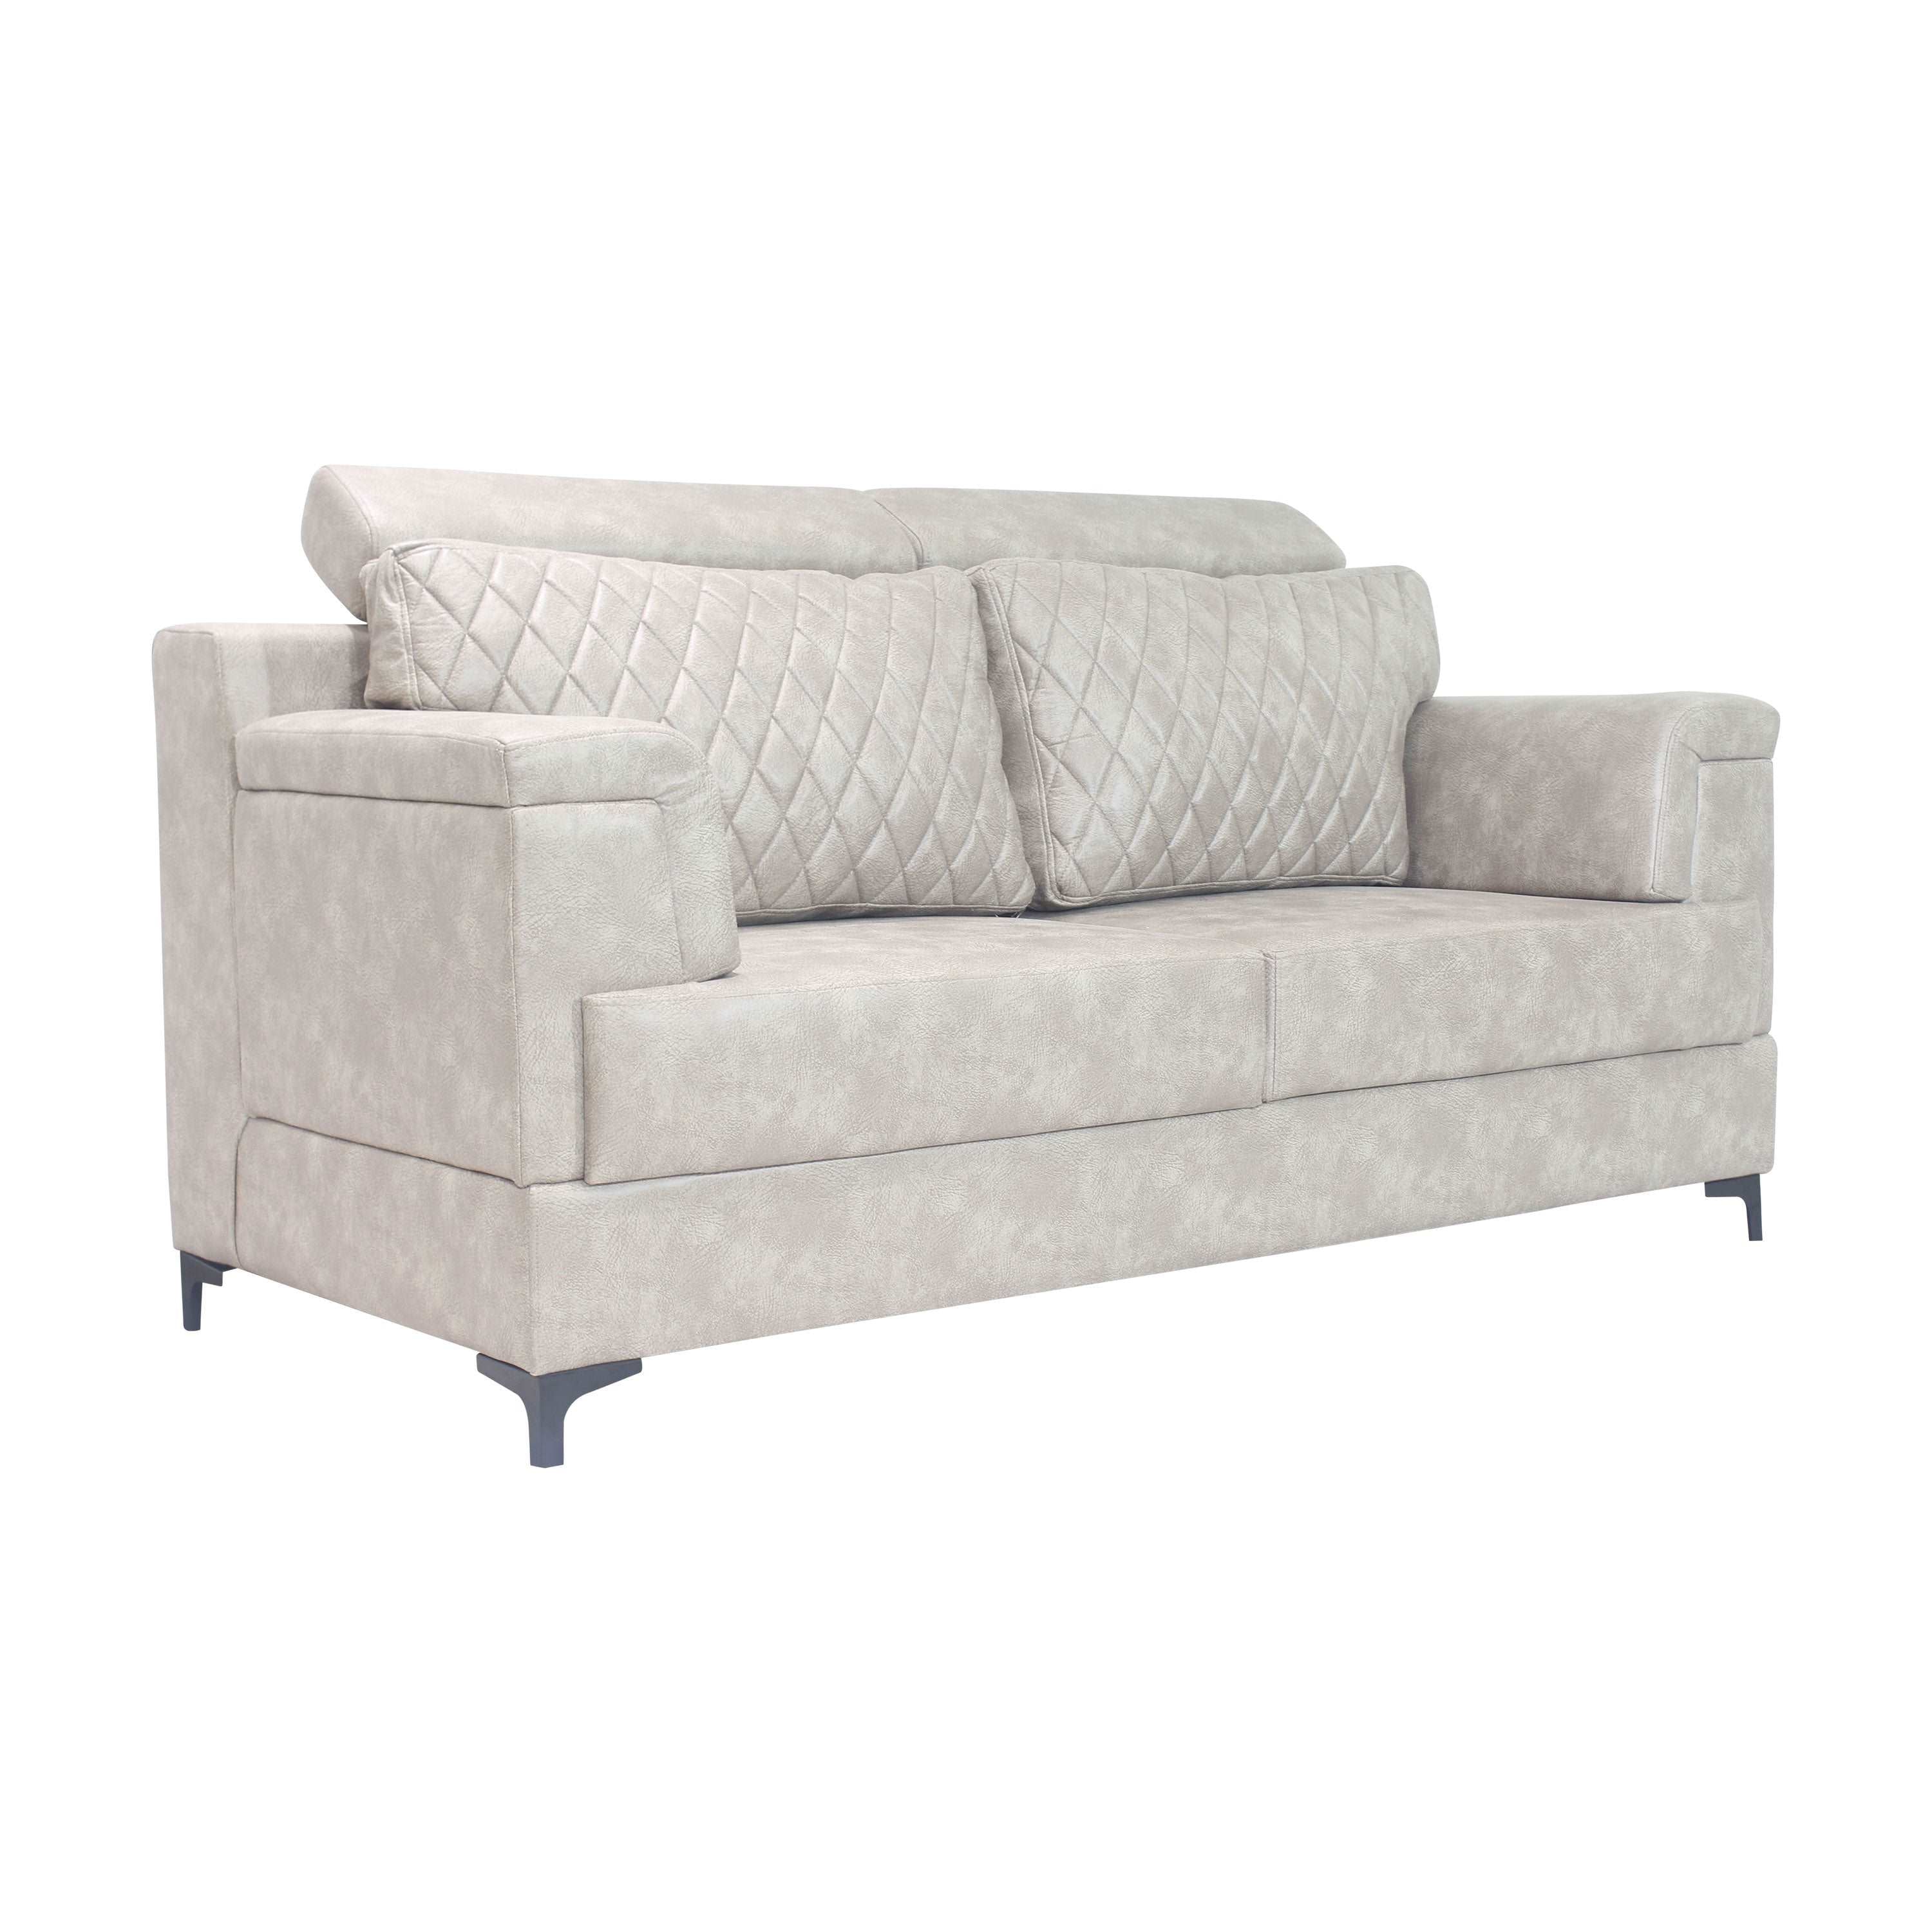 Luis 3+2 Sofa Set with Divider